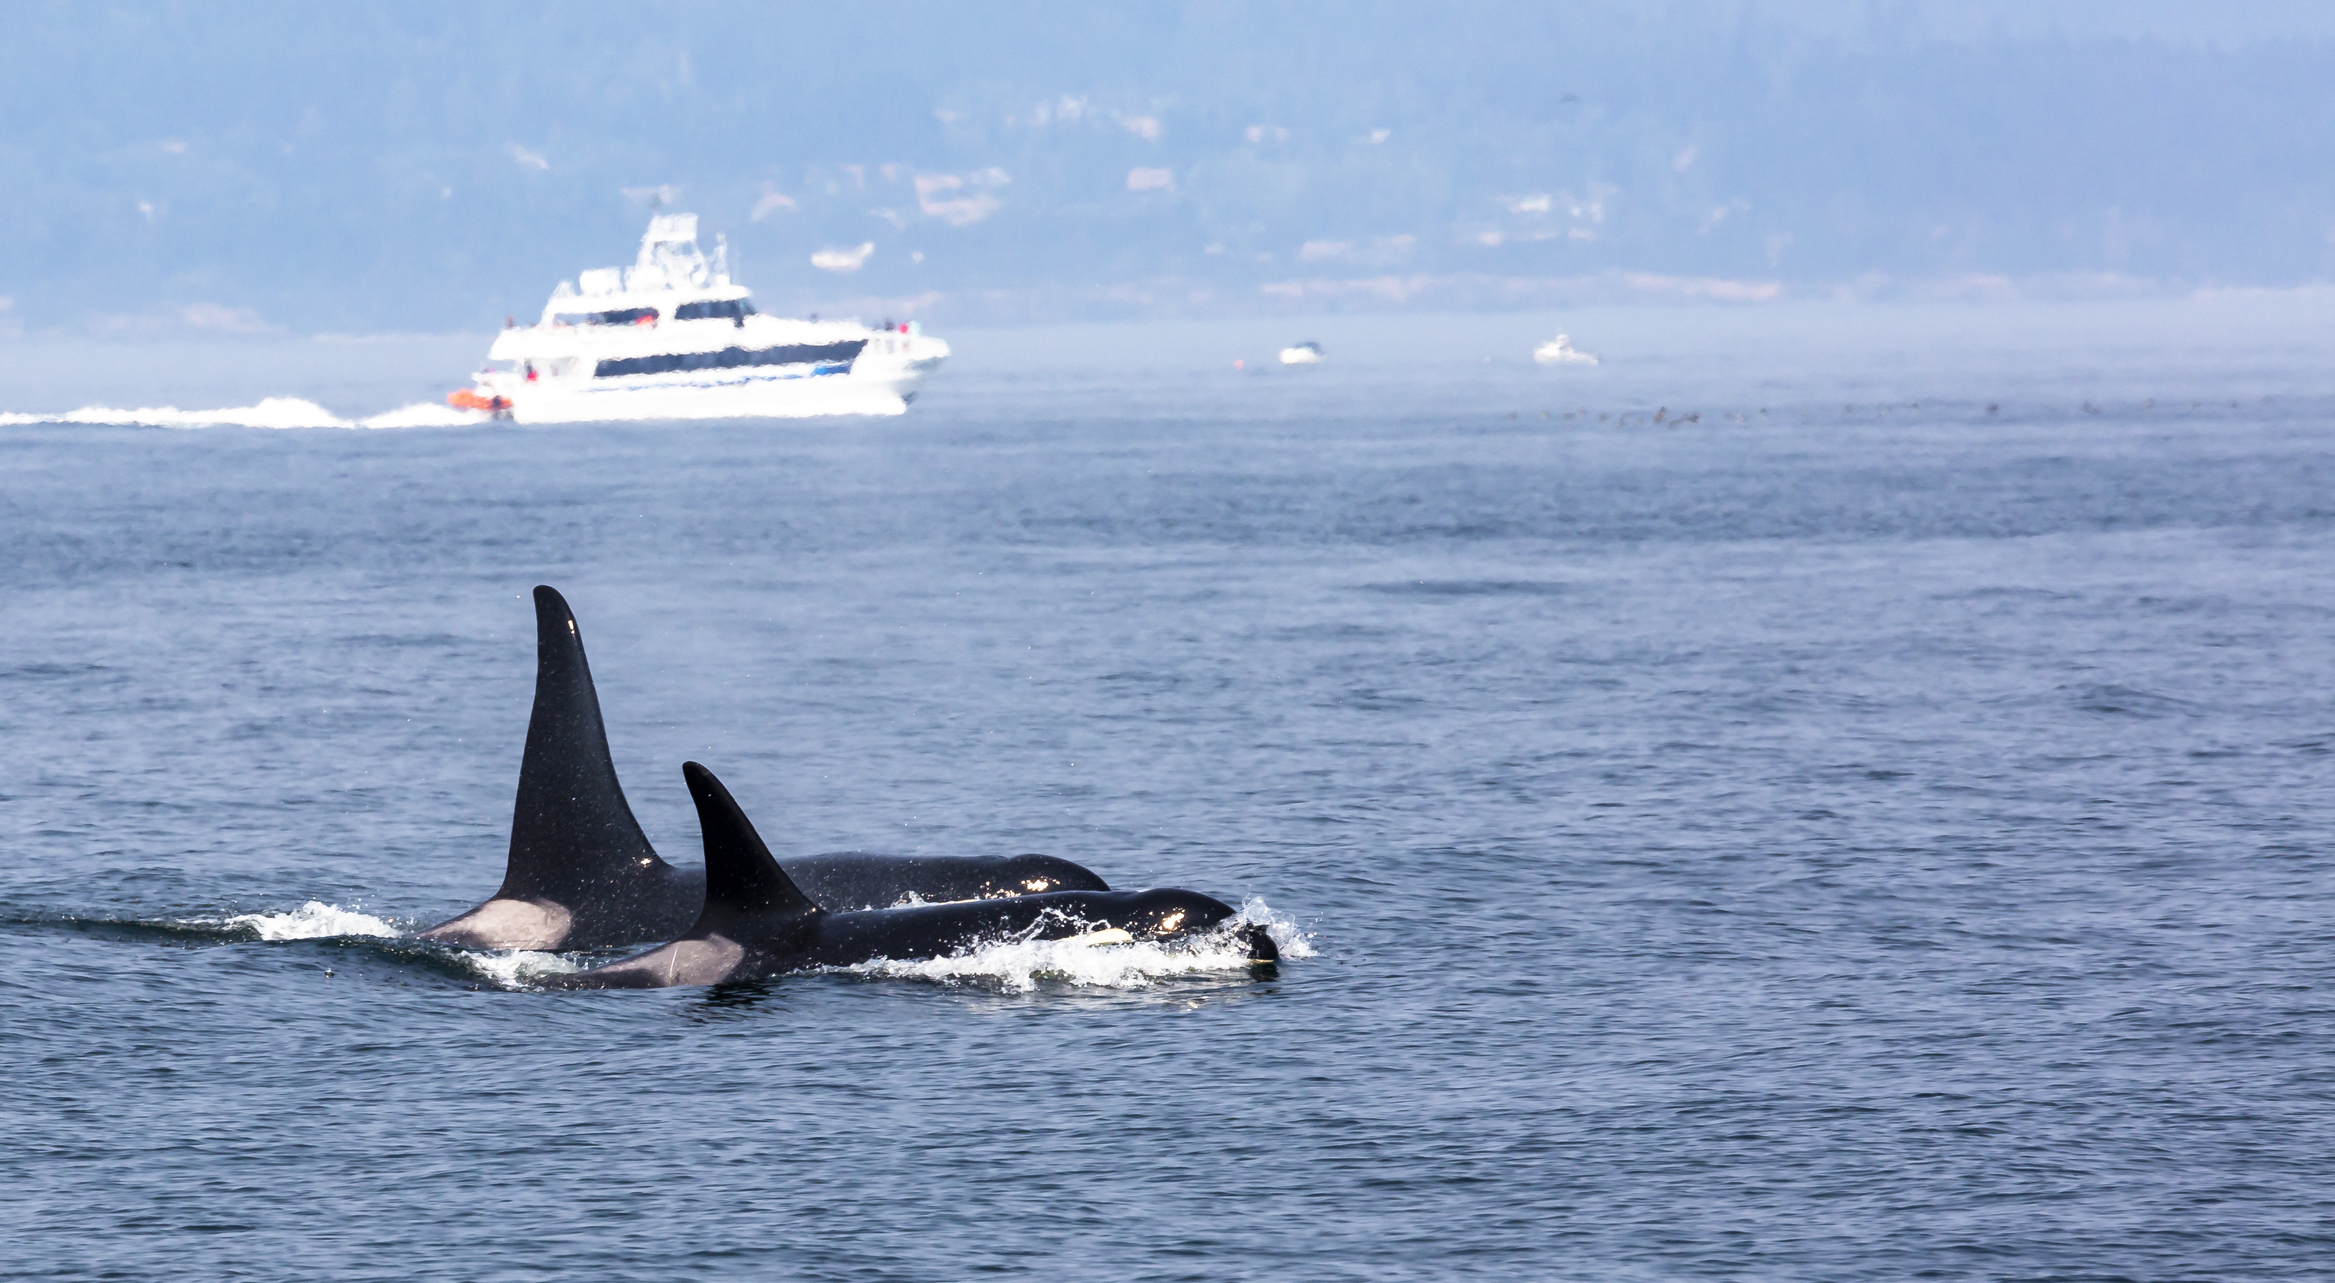 A pod of killer whales on the move in the Pacific Ocean.